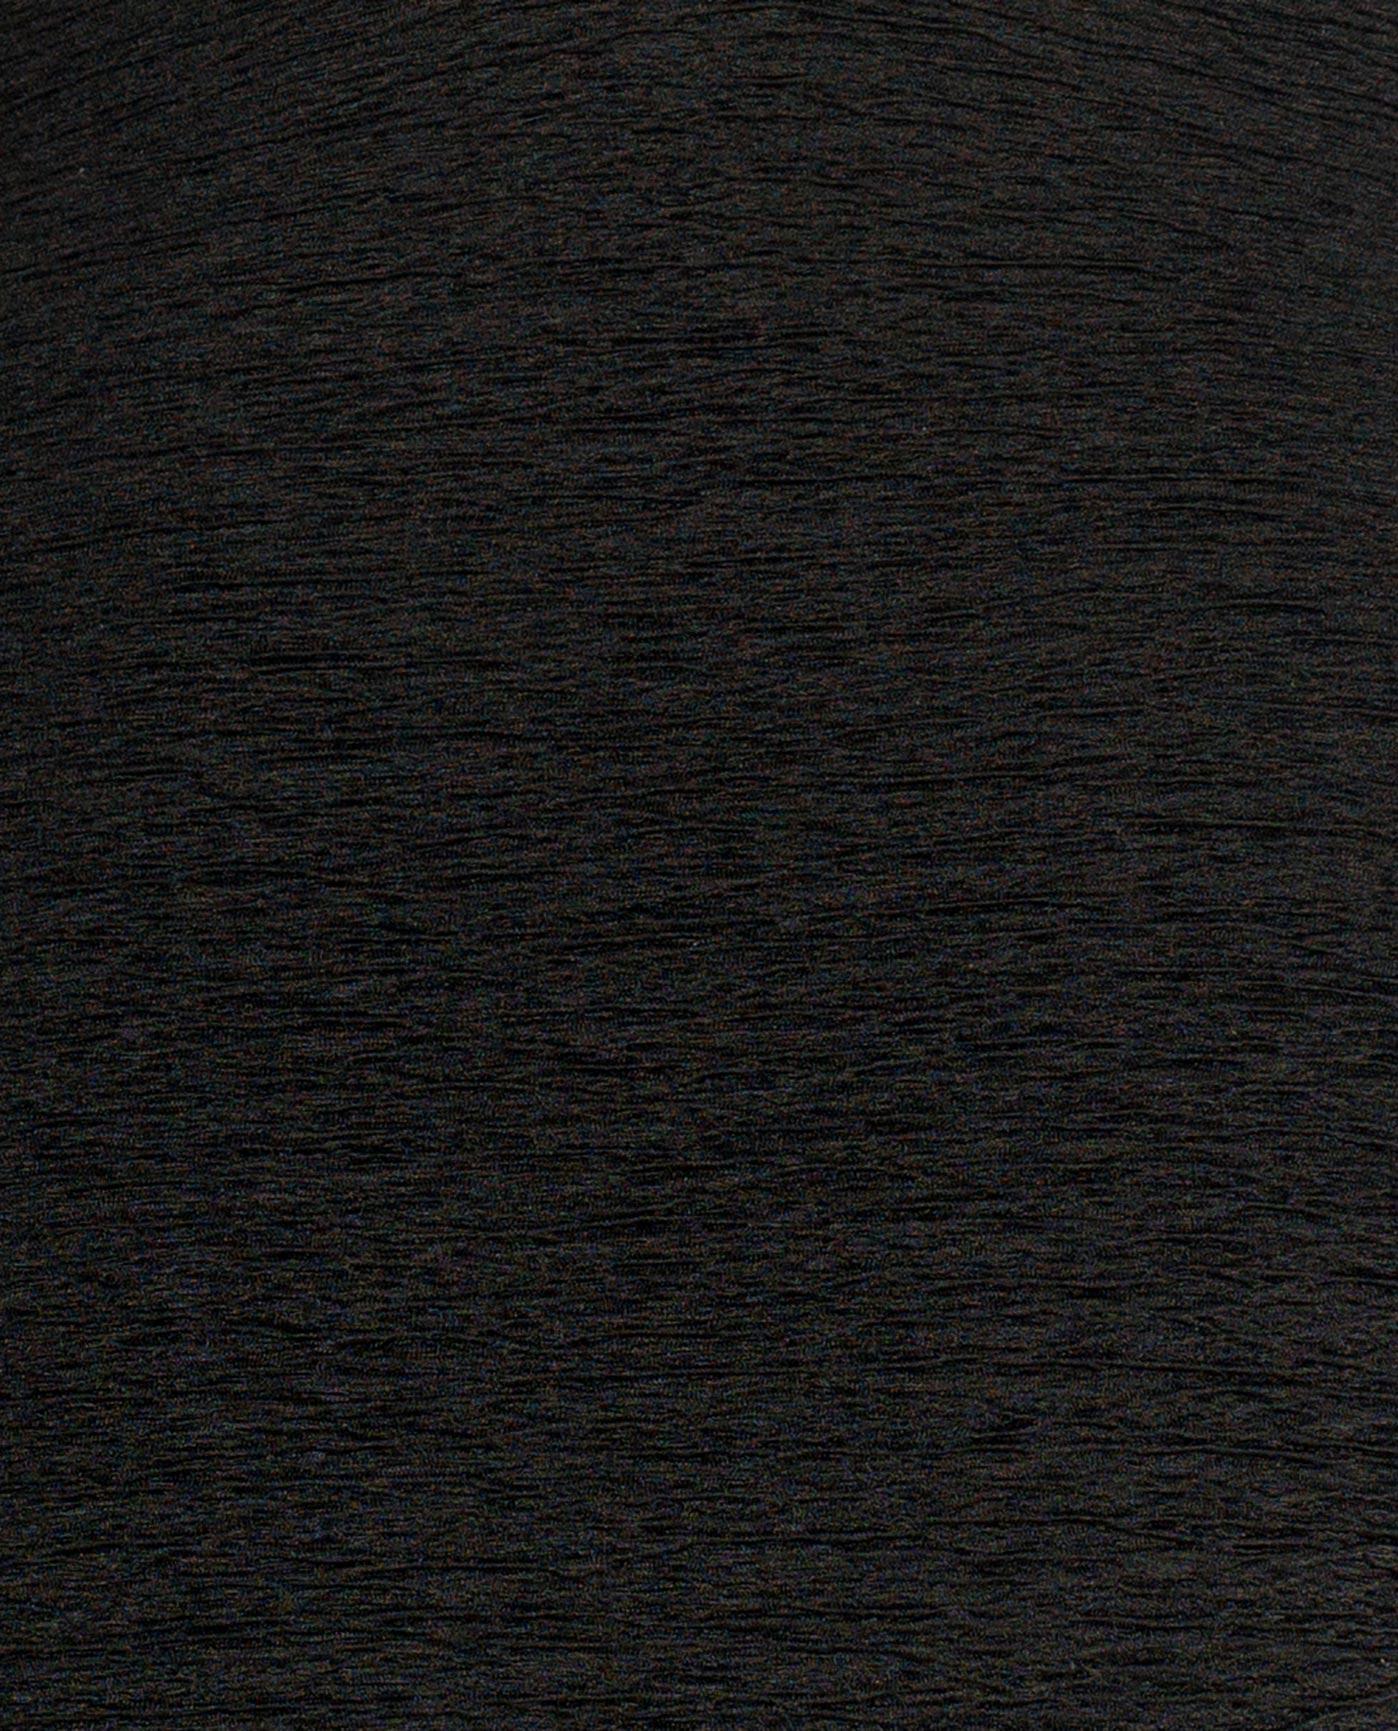 FABRIC SWATCH VIEW OF CHLORINE RESISTANT KRINKLE TEXTURED SOLID HIGH NECK ONE PIECE | KRINKLE BLACK 2023